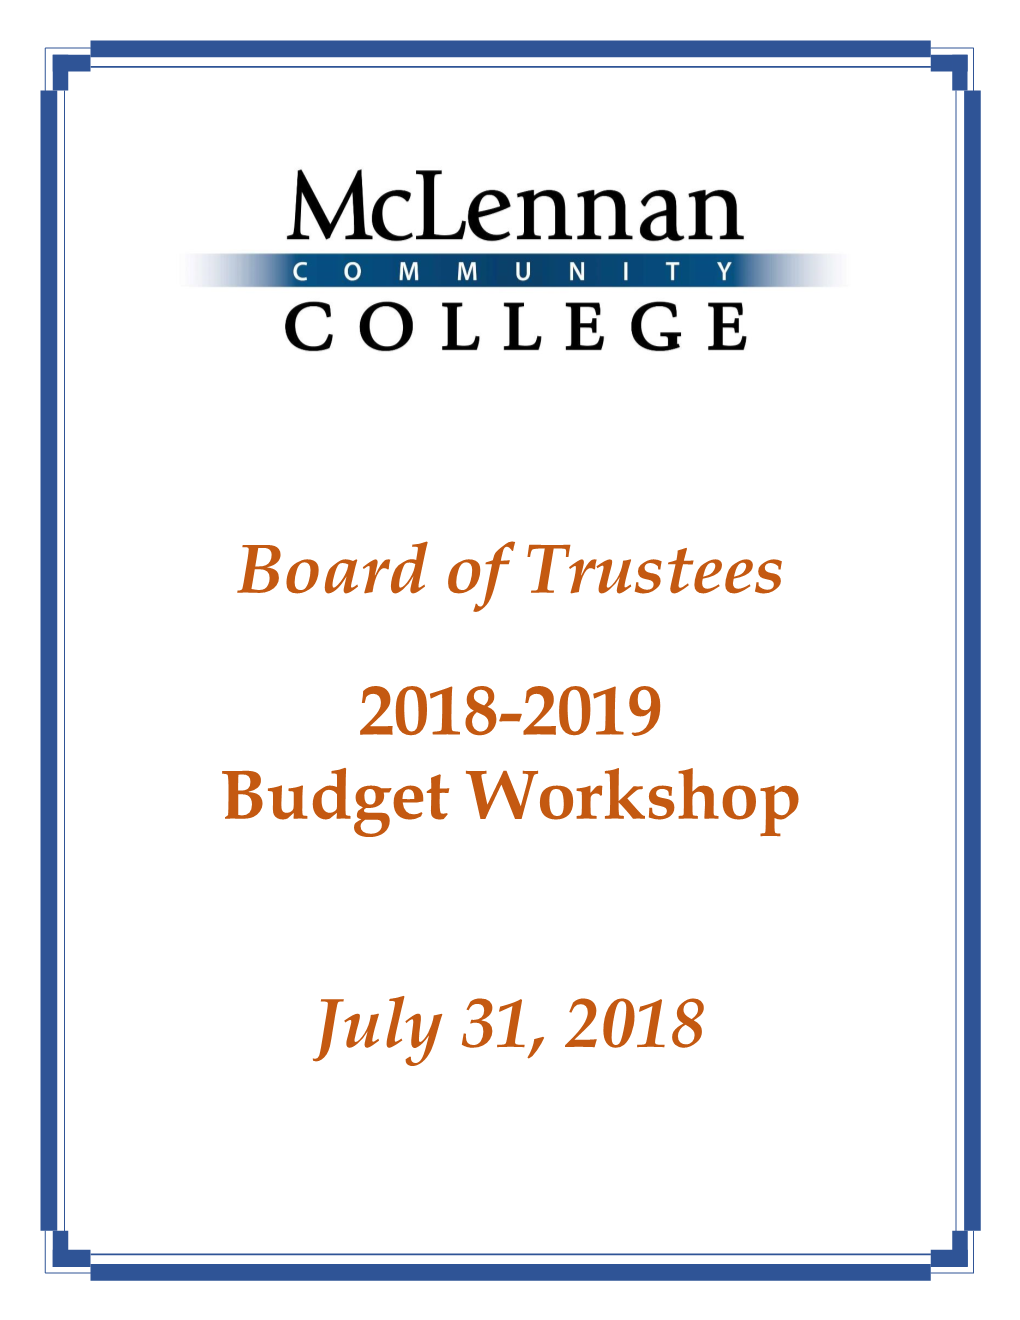 Board of Trustees 2018-2019 Budget